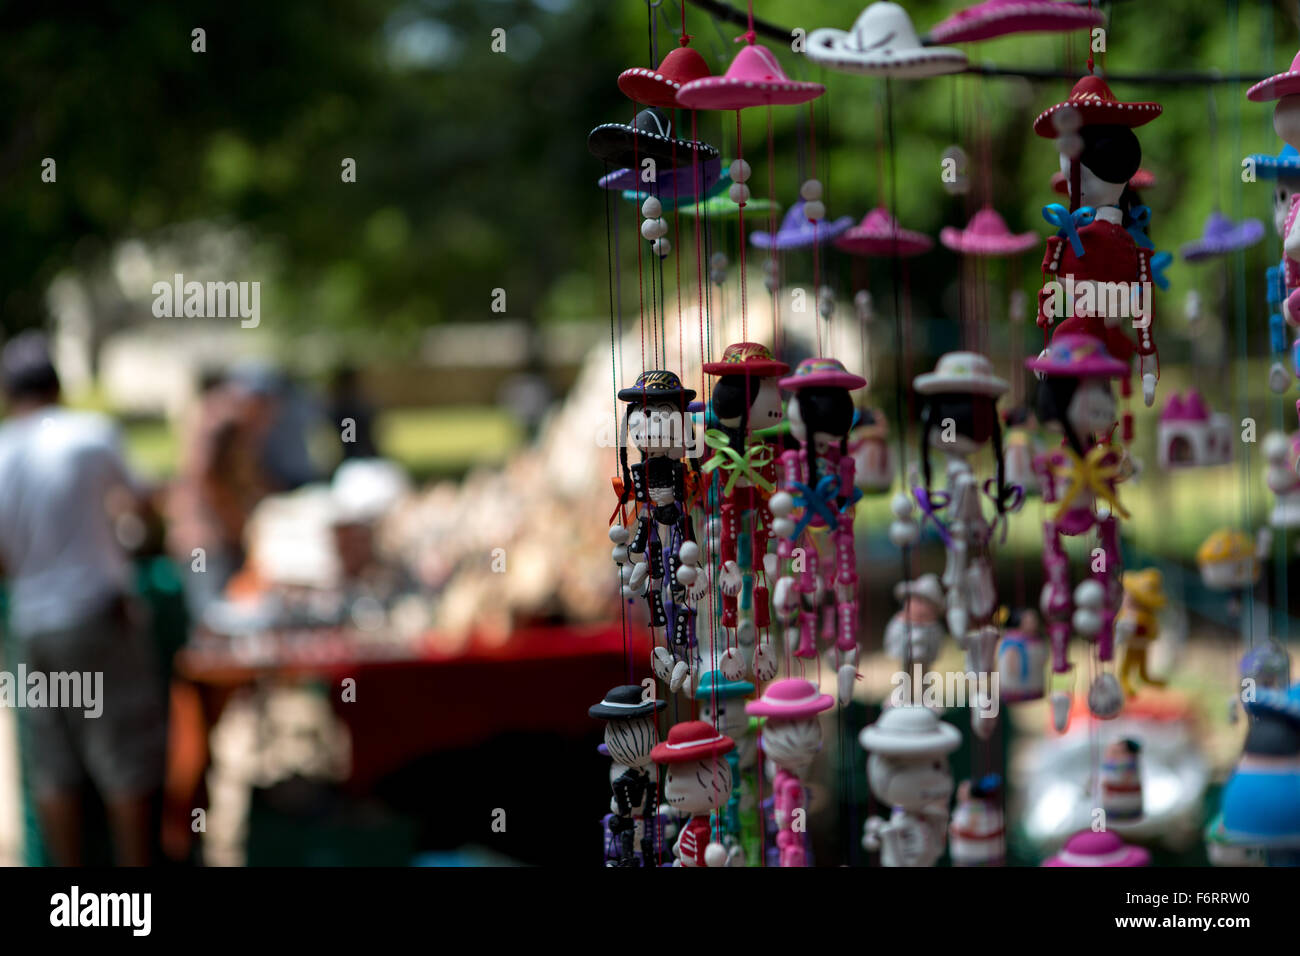 souvenirs for sale at Mayan ruins at Chichen Itza, Yucatan peninsula, Mexico. Skeleton and day of the dead puppets. Stock Photo